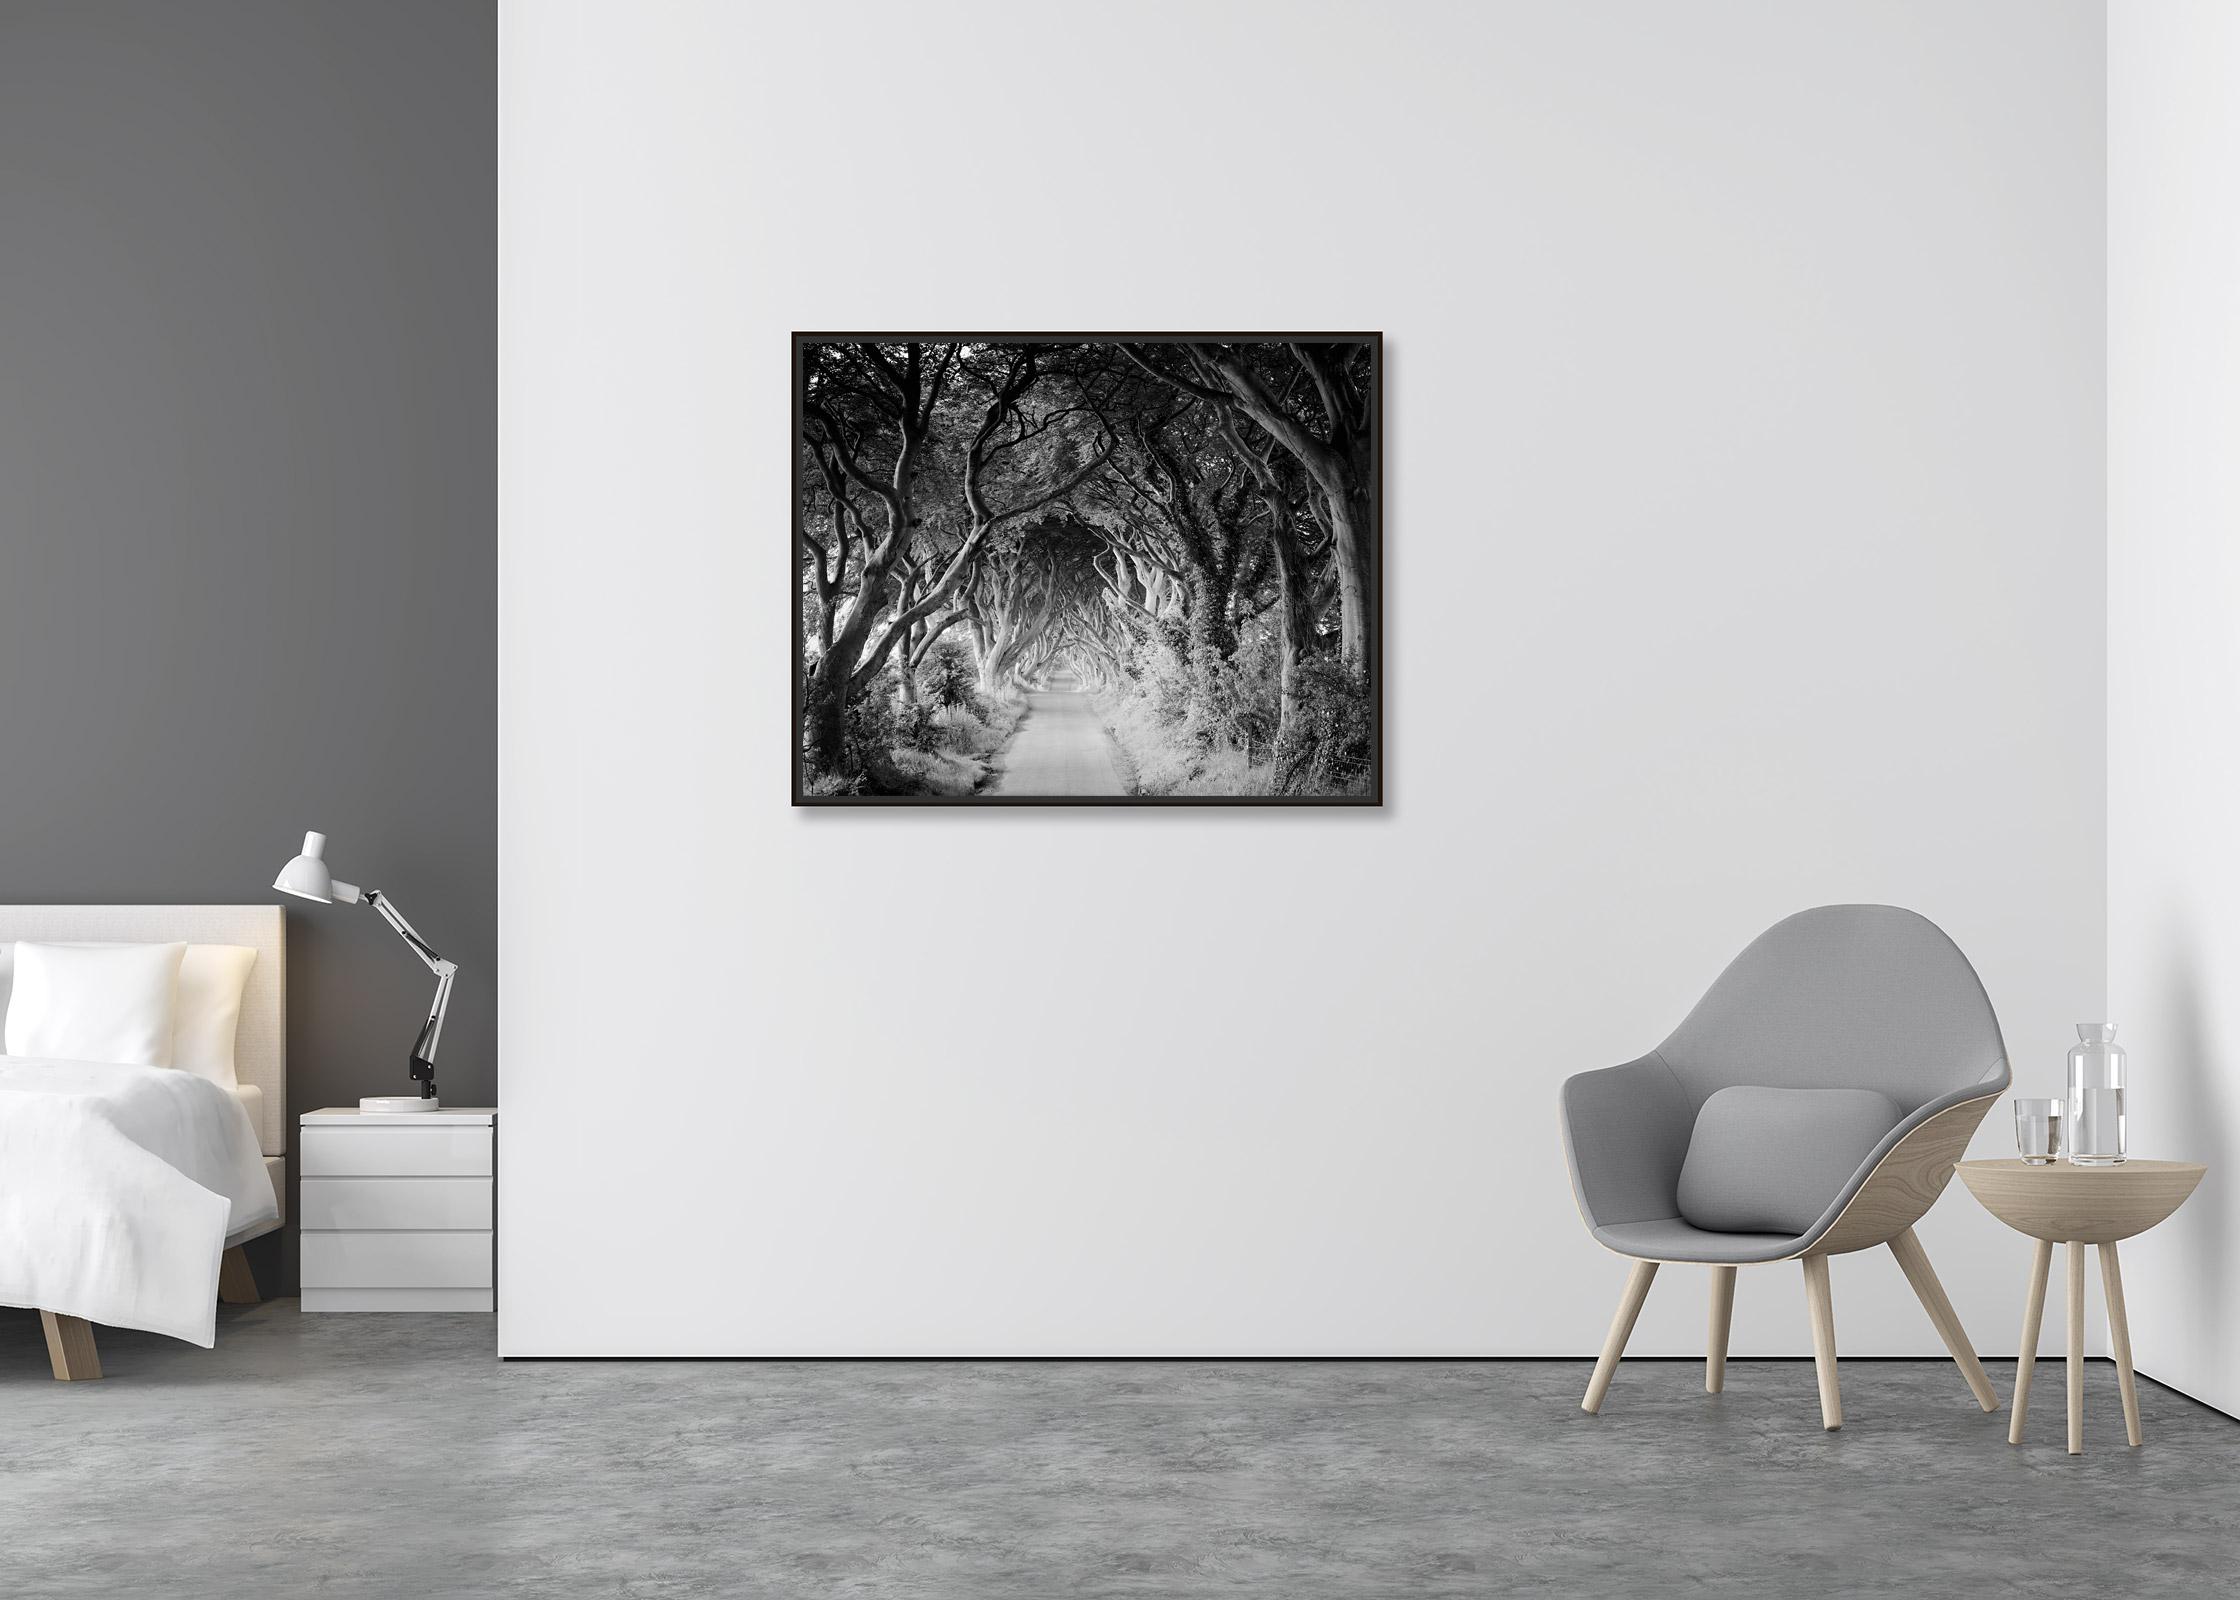 Dark Hedges, beech, trees, Ireland, black and white art landscape photography - Contemporary Photograph by Gerald Berghammer